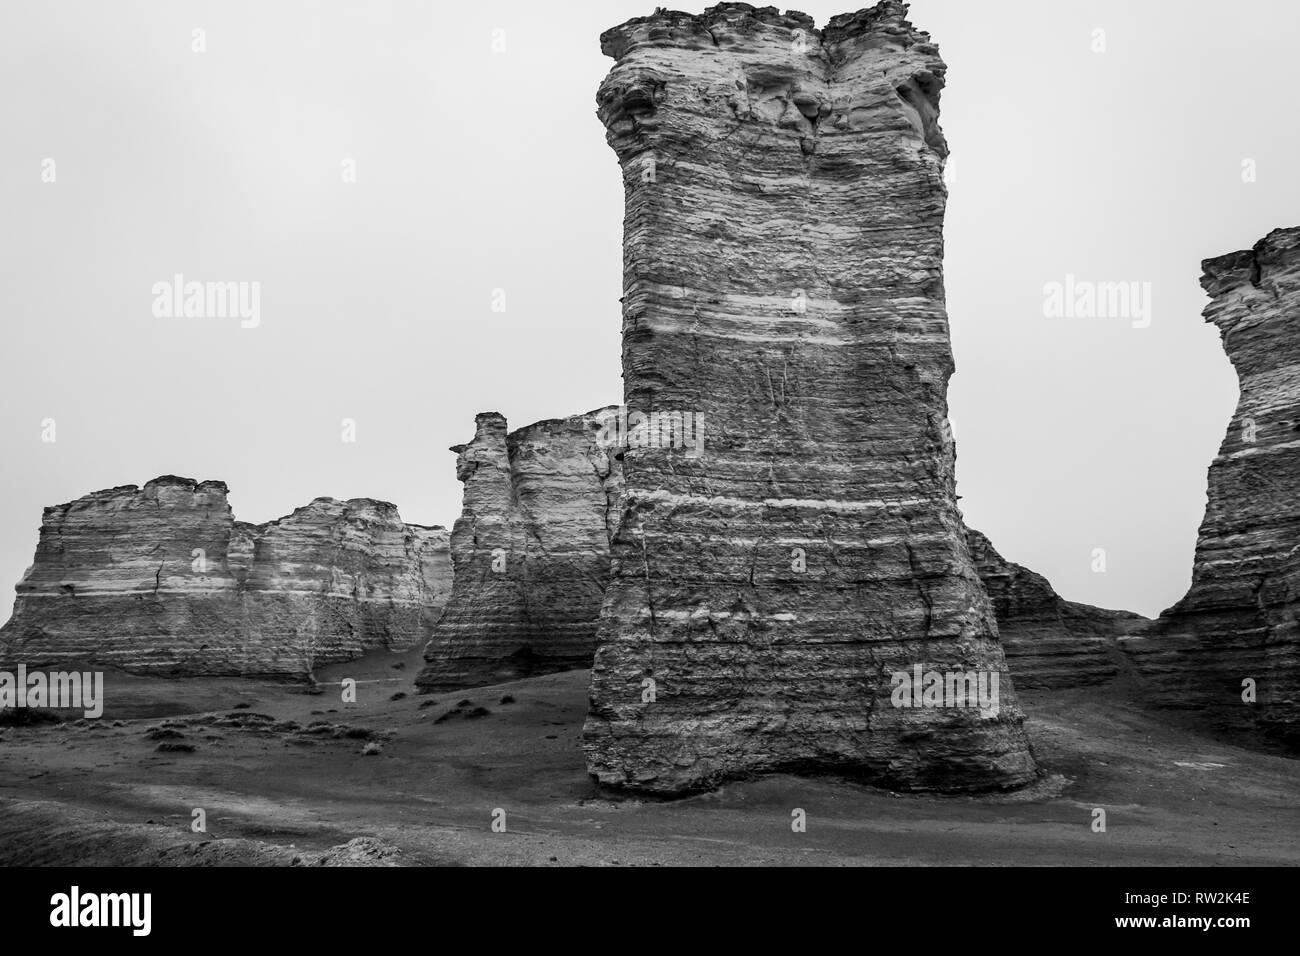 Monument Rocks Are Chalk Formations That Are An Aftermath Of